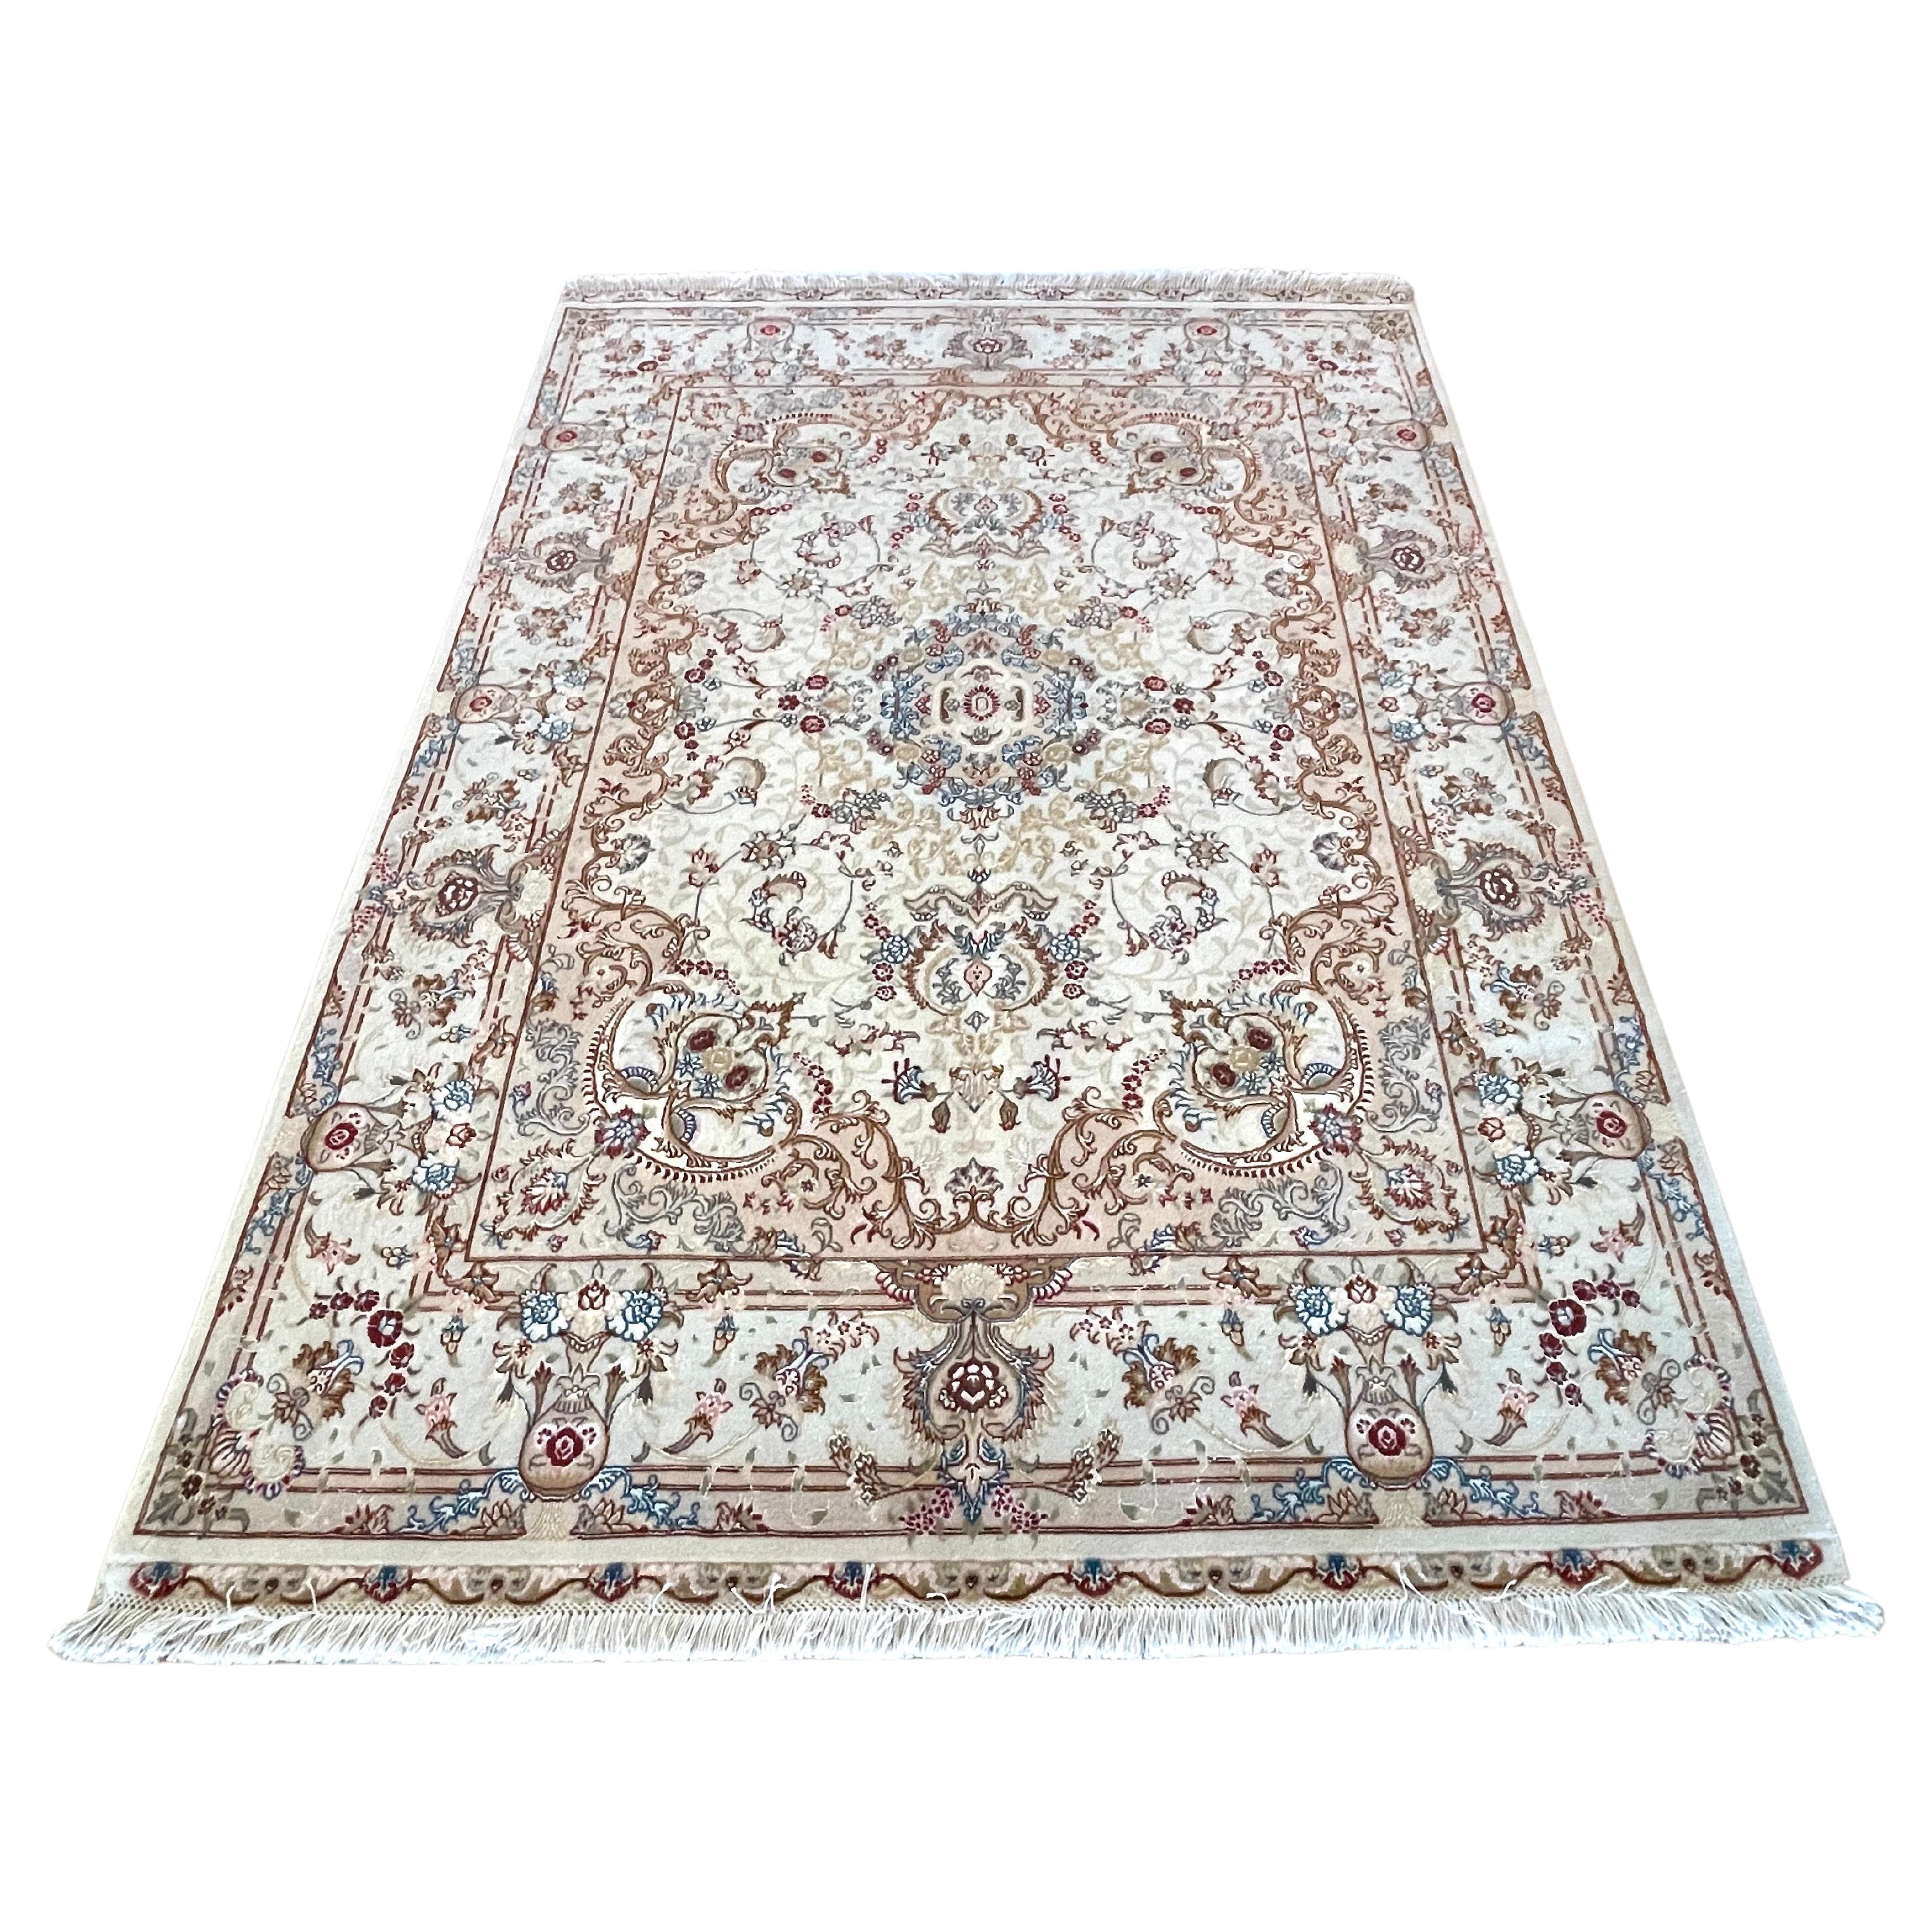 Introducing a stunning hand knotted Persian Tabriz rug that epitomizes quality craftsmanship and timeless beauty. Featuring an enchanting medallion floral design with an stunning kilim baft at both ends, this rug captivates with its unique blend of